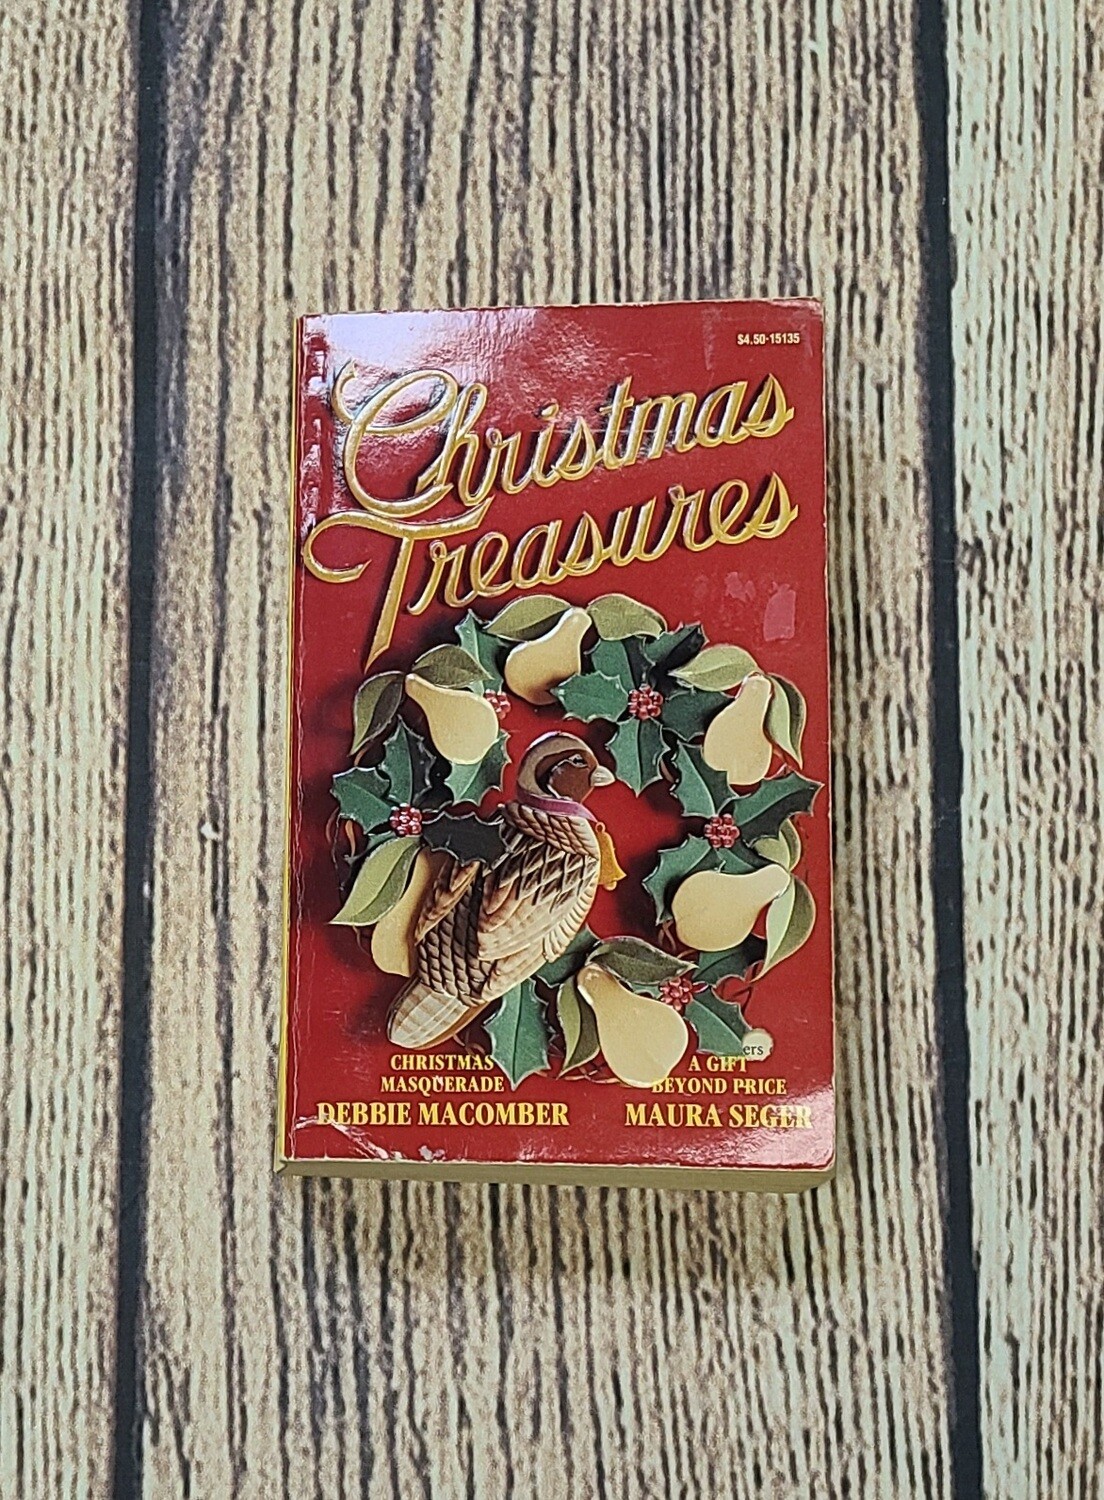 Christmas Treasures by Debbie Macomber and Maura Seger